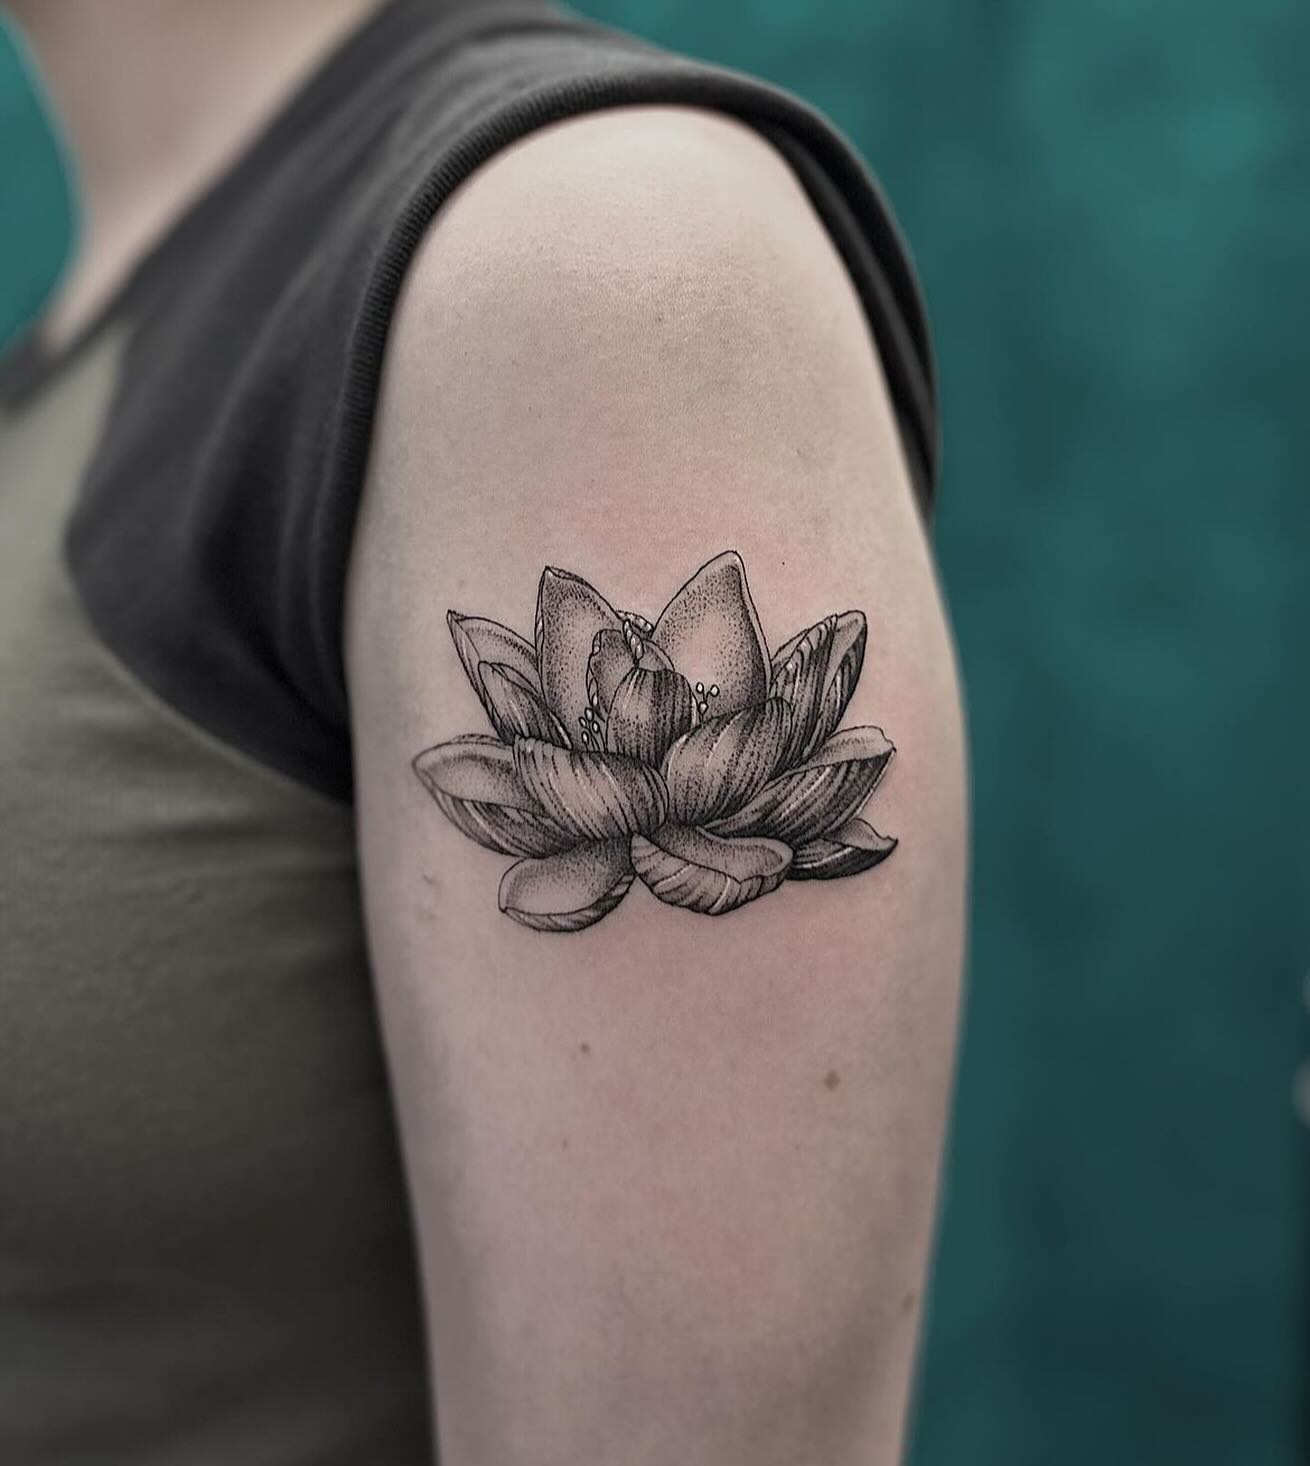 Beautiful lotus flower tattoo done by our own eilidhentattoos 🪷

If you love this style and would like tattooed by her message her directly or fill out an enquiry form on our website 📲📲

                         totaltattoo barber_dts easytattoo_uk eternalink dynamiccolor lockdownneedle stencilstuff 